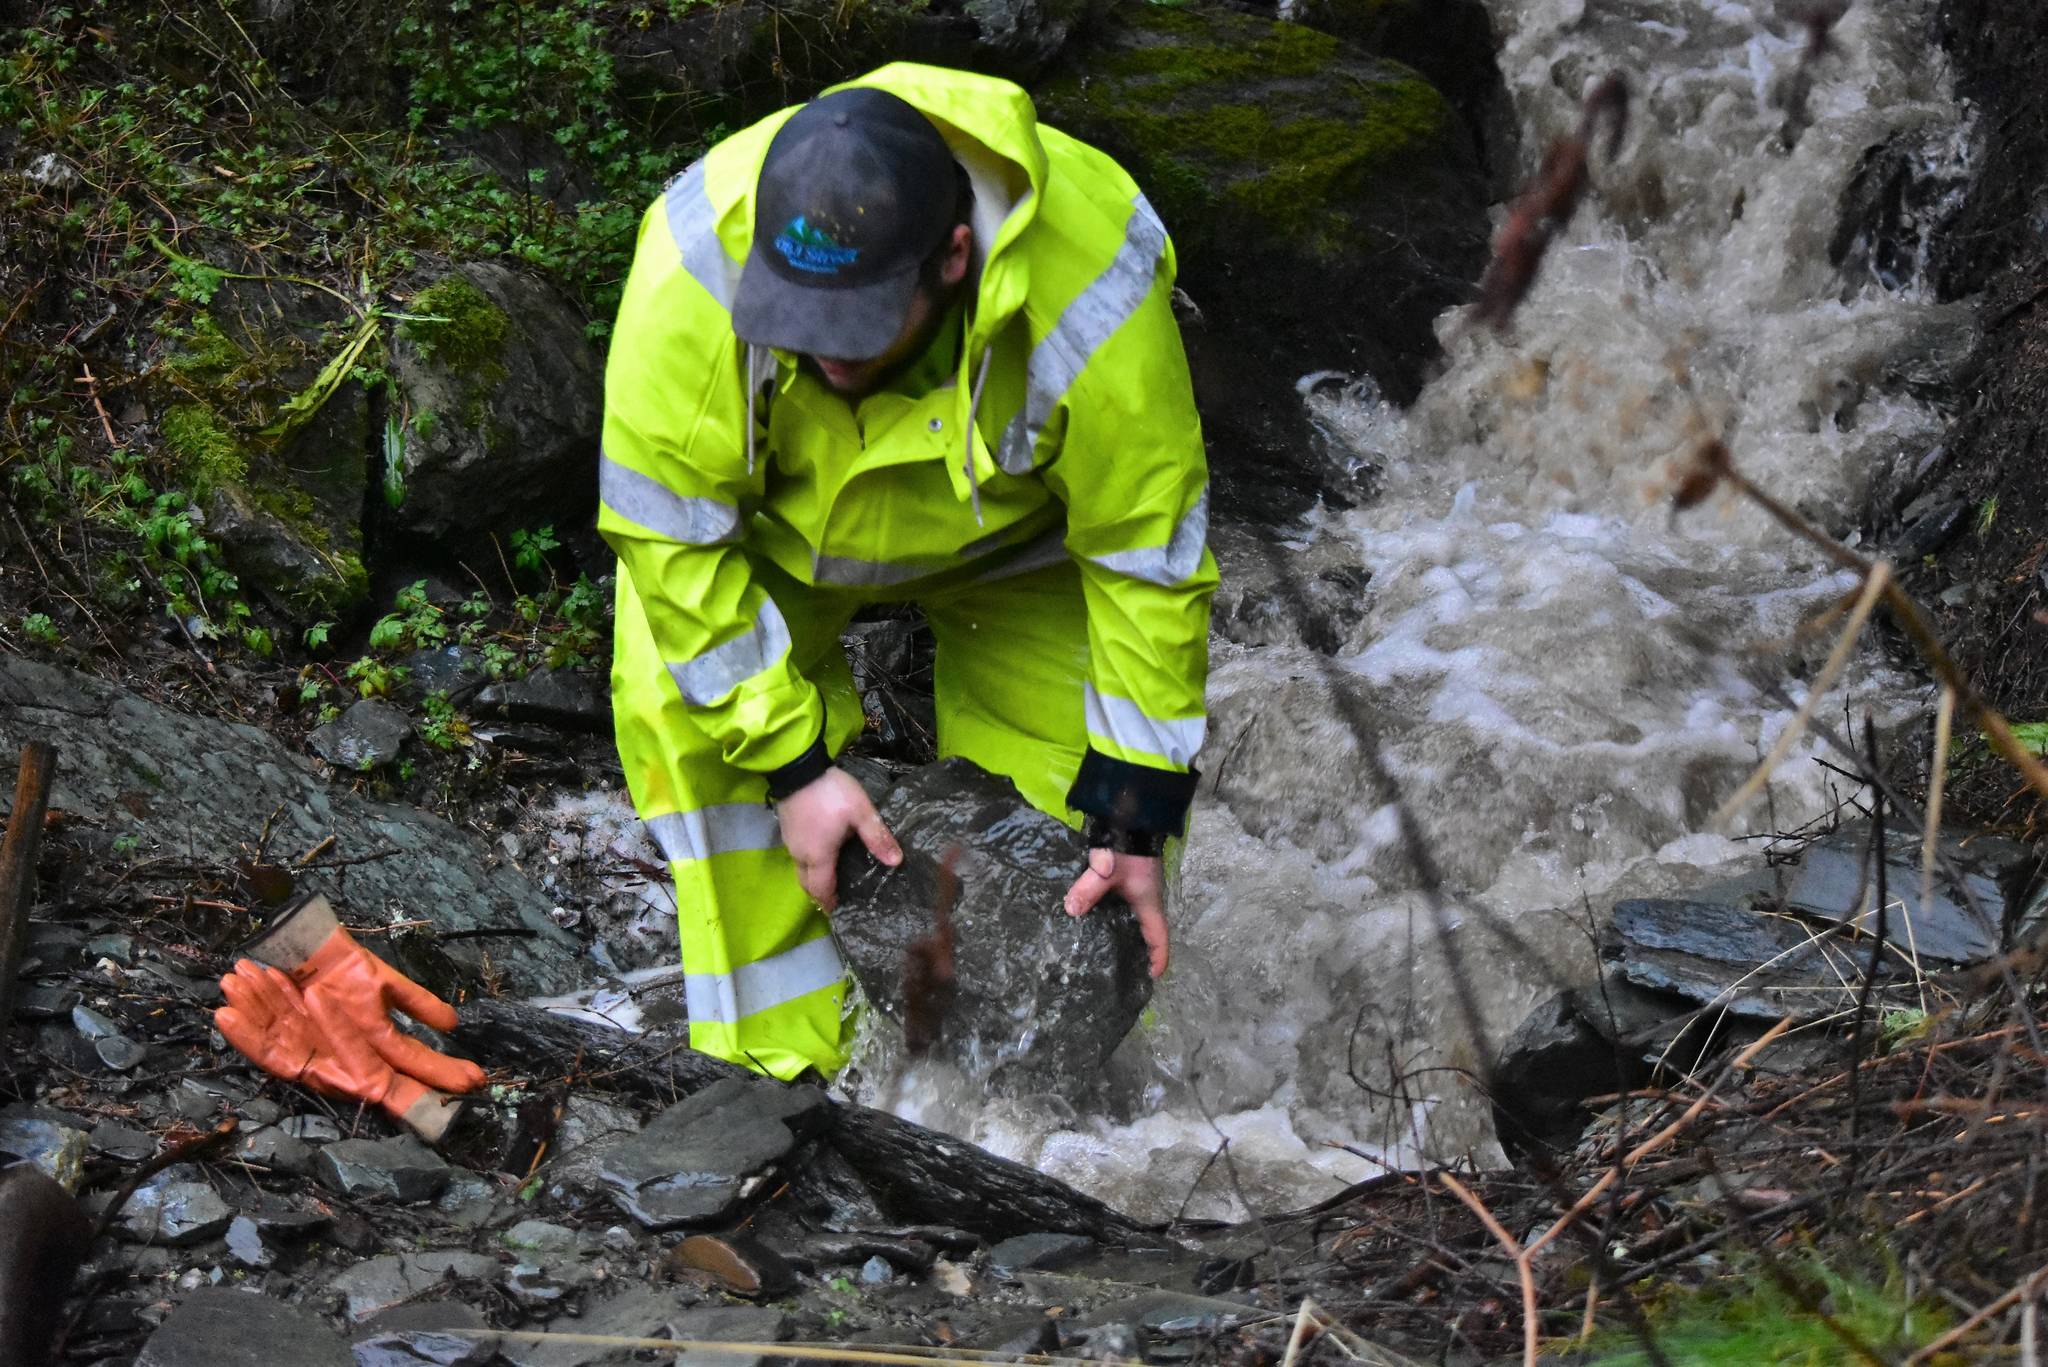 Tucker Reece, a laborer with the City and Borough Department of Parks and Recreation heads to clear a blockage near Cope Park caused by heavy rains on Tuesday, Dec. 1, 2020. (Peter Segall / Juneau Empire)